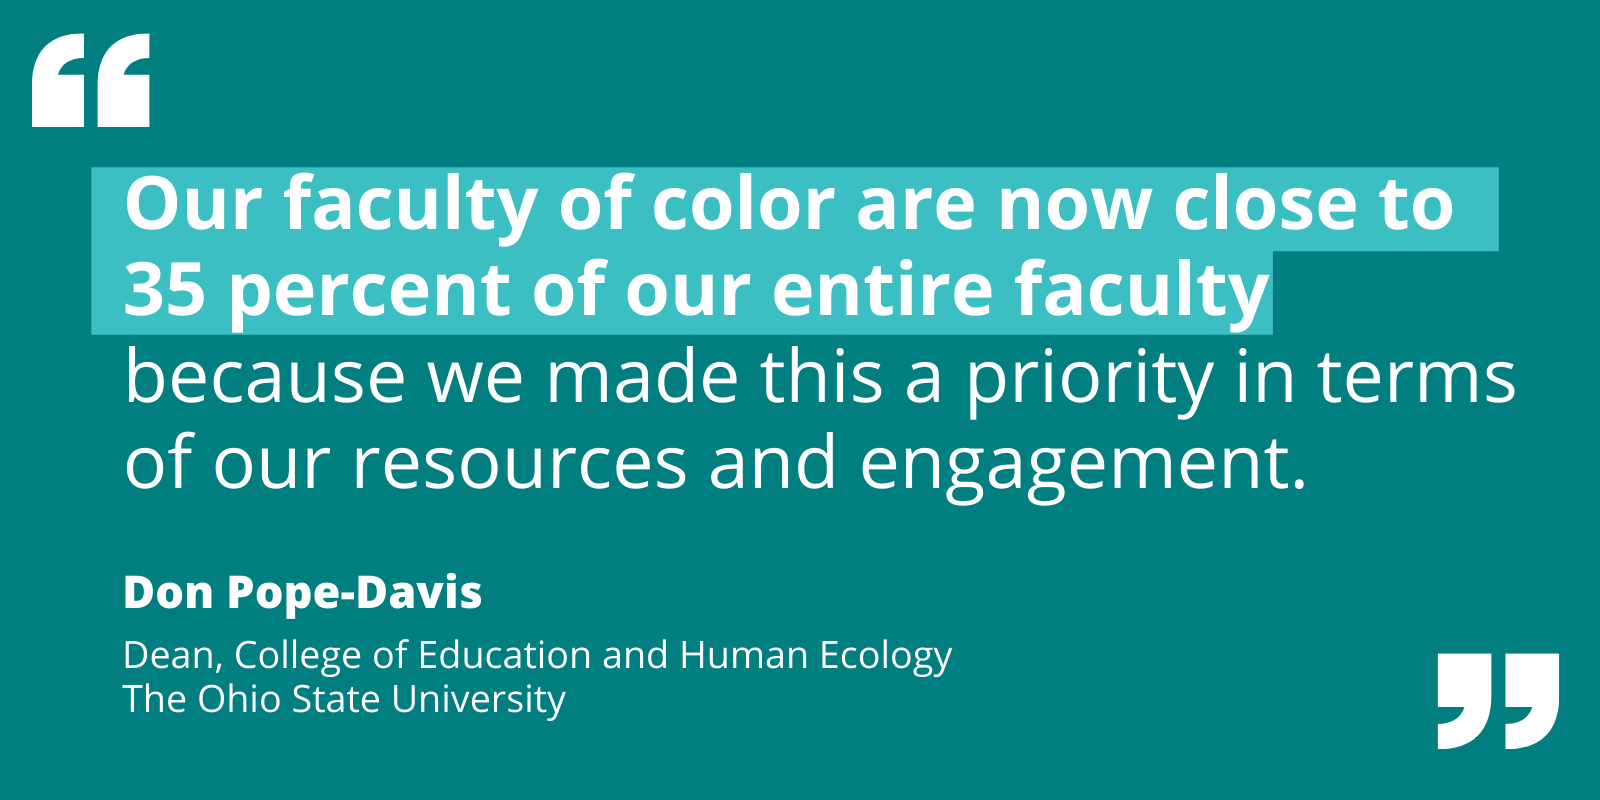 Quote by Don Pope-Davis re: current faculty includes 35% people of color because OSU prioritized resources and engagement.